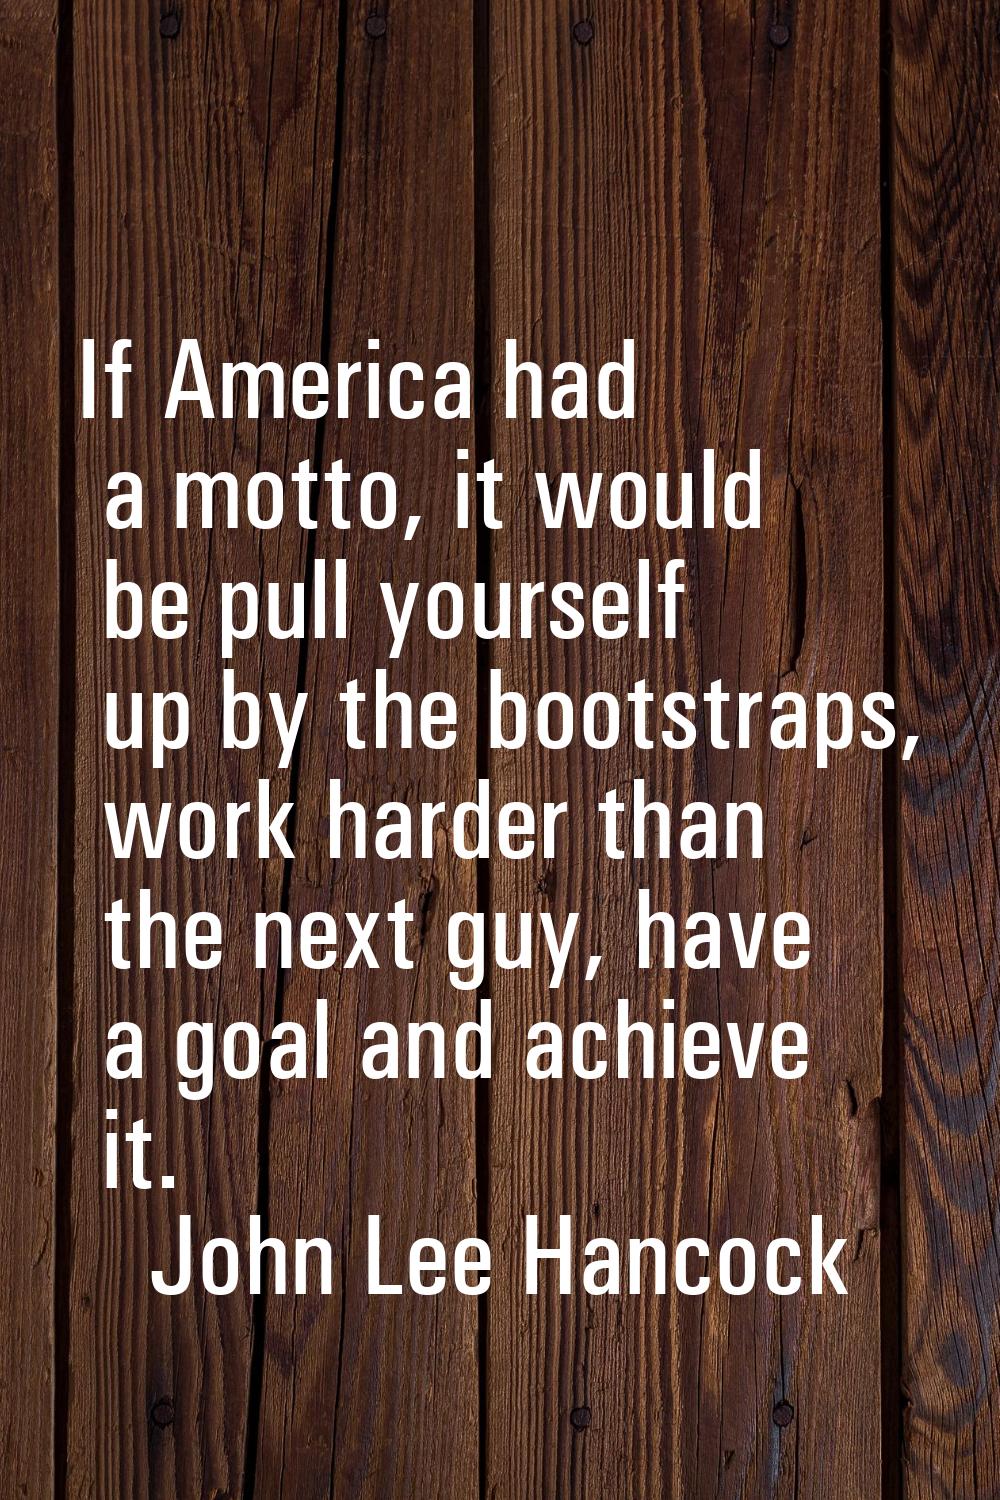 If America had a motto, it would be pull yourself up by the bootstraps, work harder than the next g